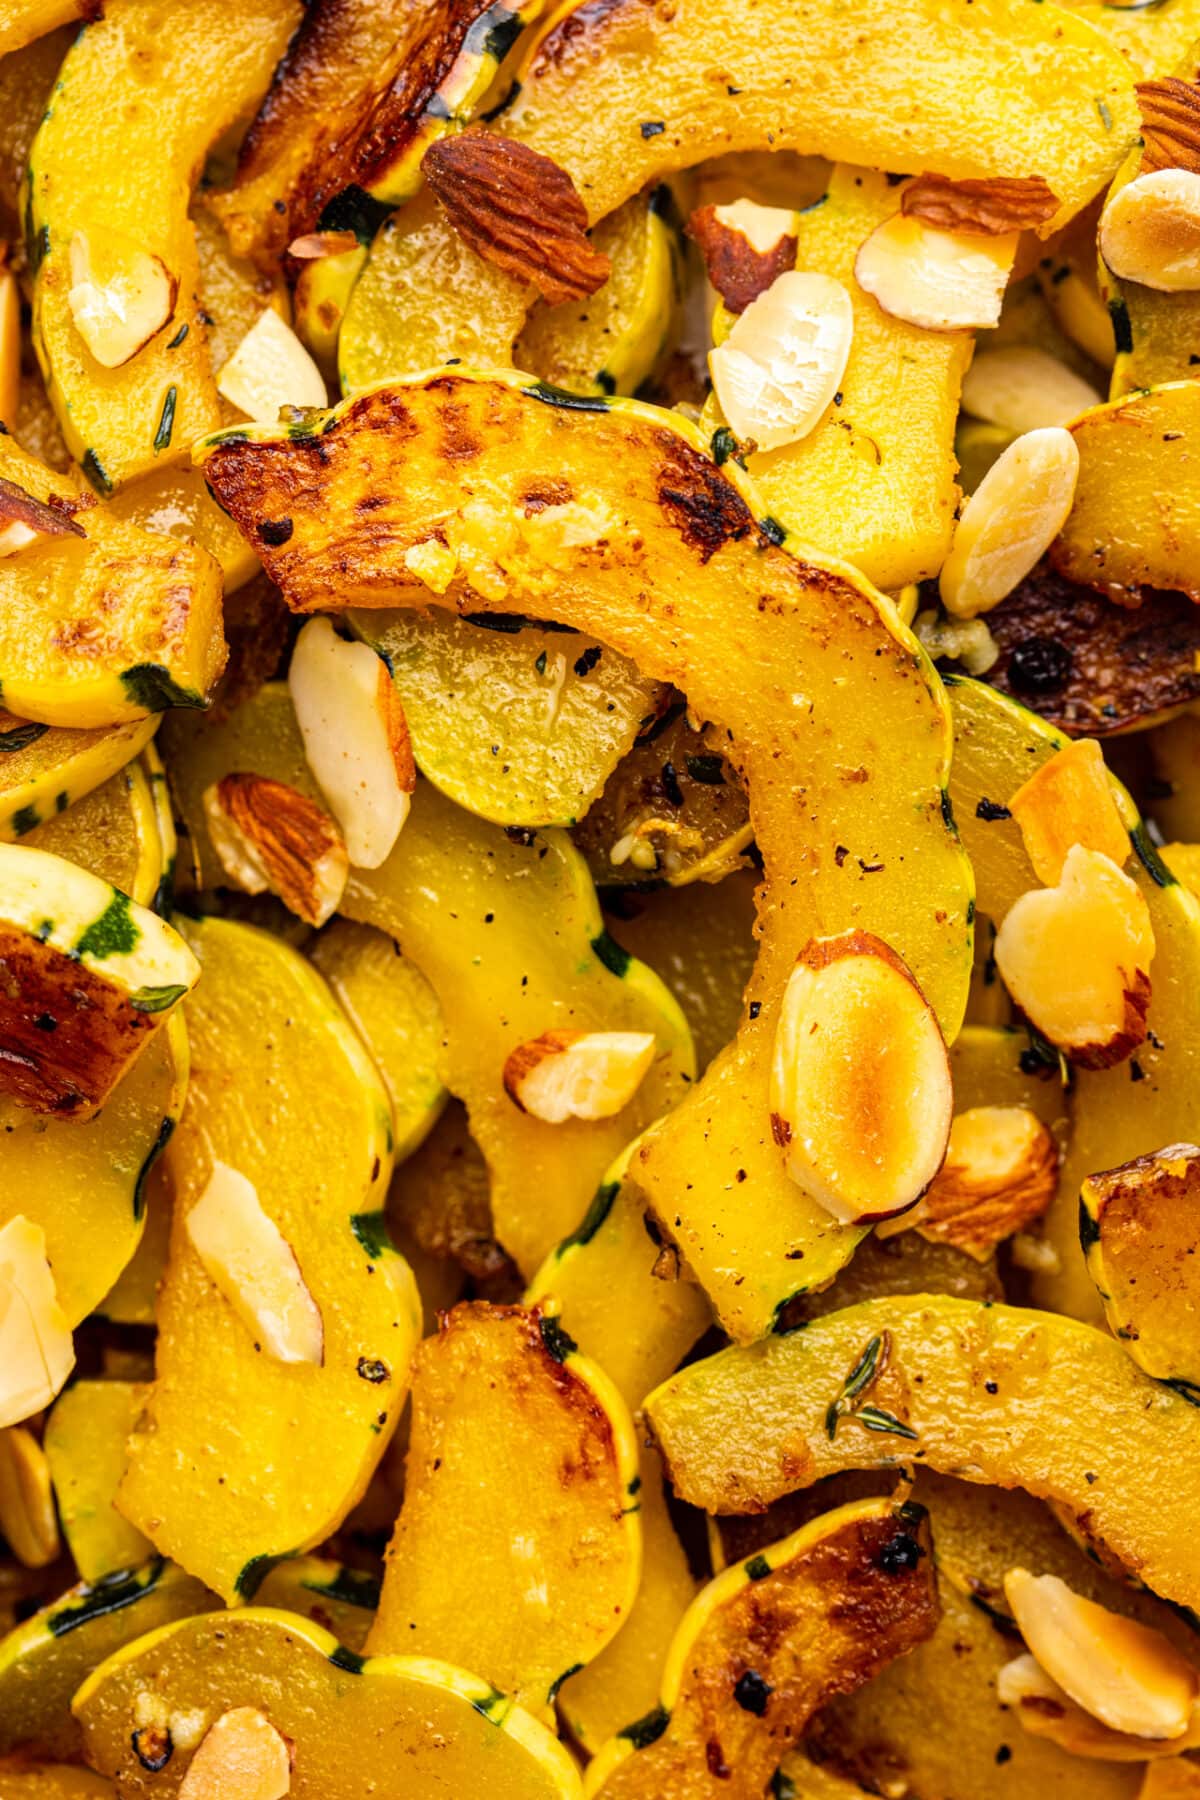 a zoomed in image showing the texture of sauteed delicata squash